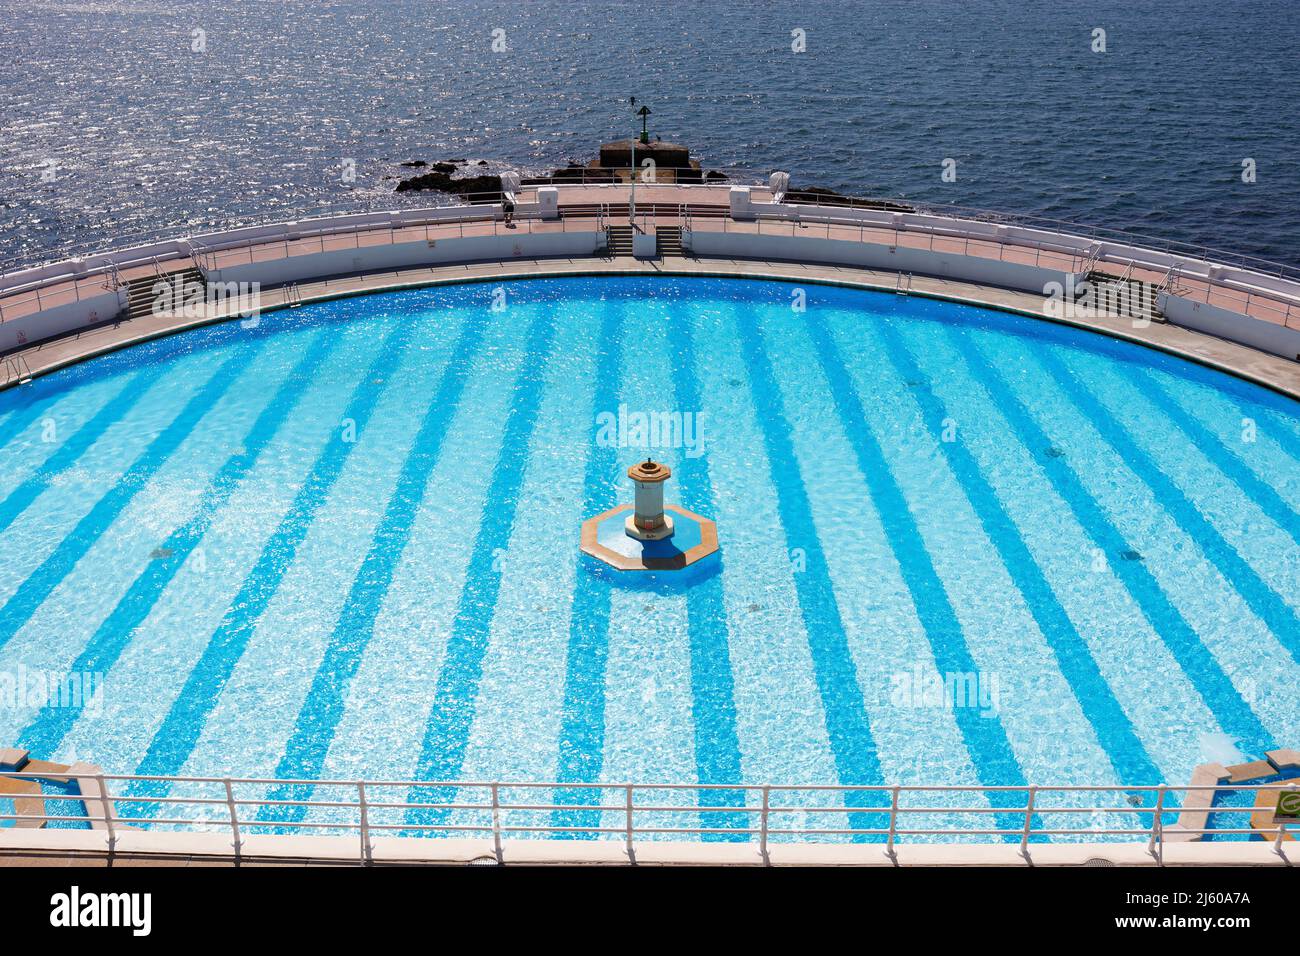 Plymouth, Devon, UK. 26th April, 2022. A sunny early spring day at The Hoe in Plymouth. Tinside Lido is a salt water art deco style swimming pool buil Stock Photo